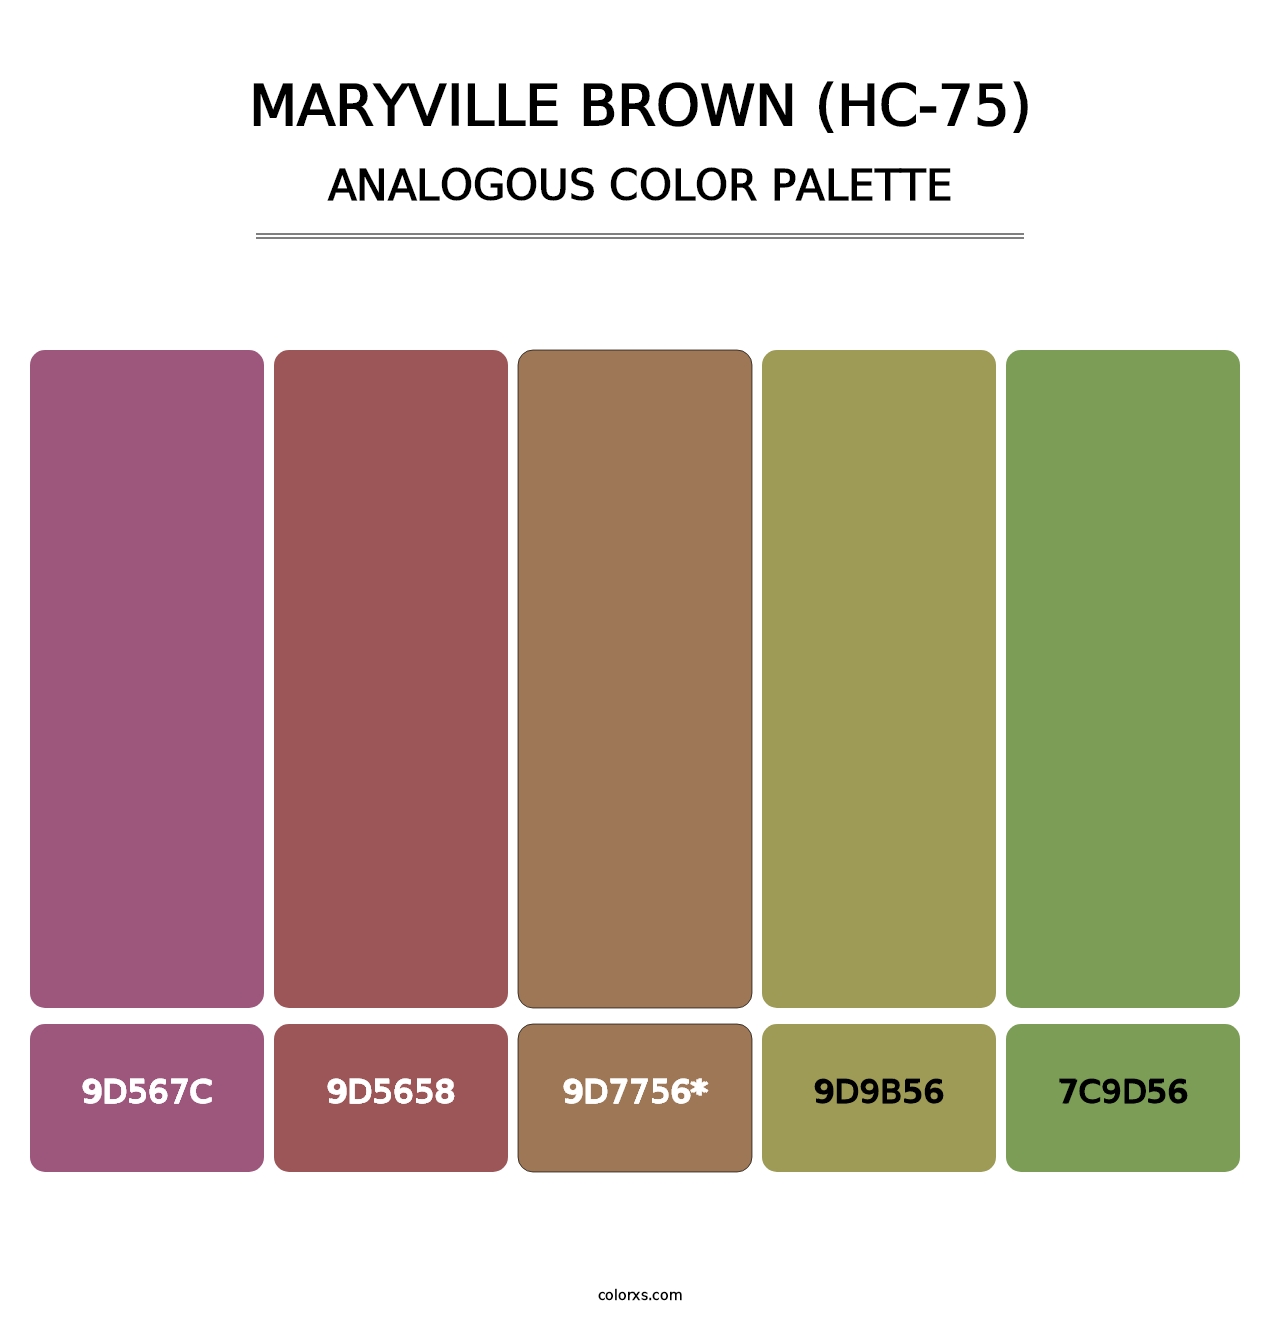 Maryville Brown (HC-75) - Analogous Color Palette